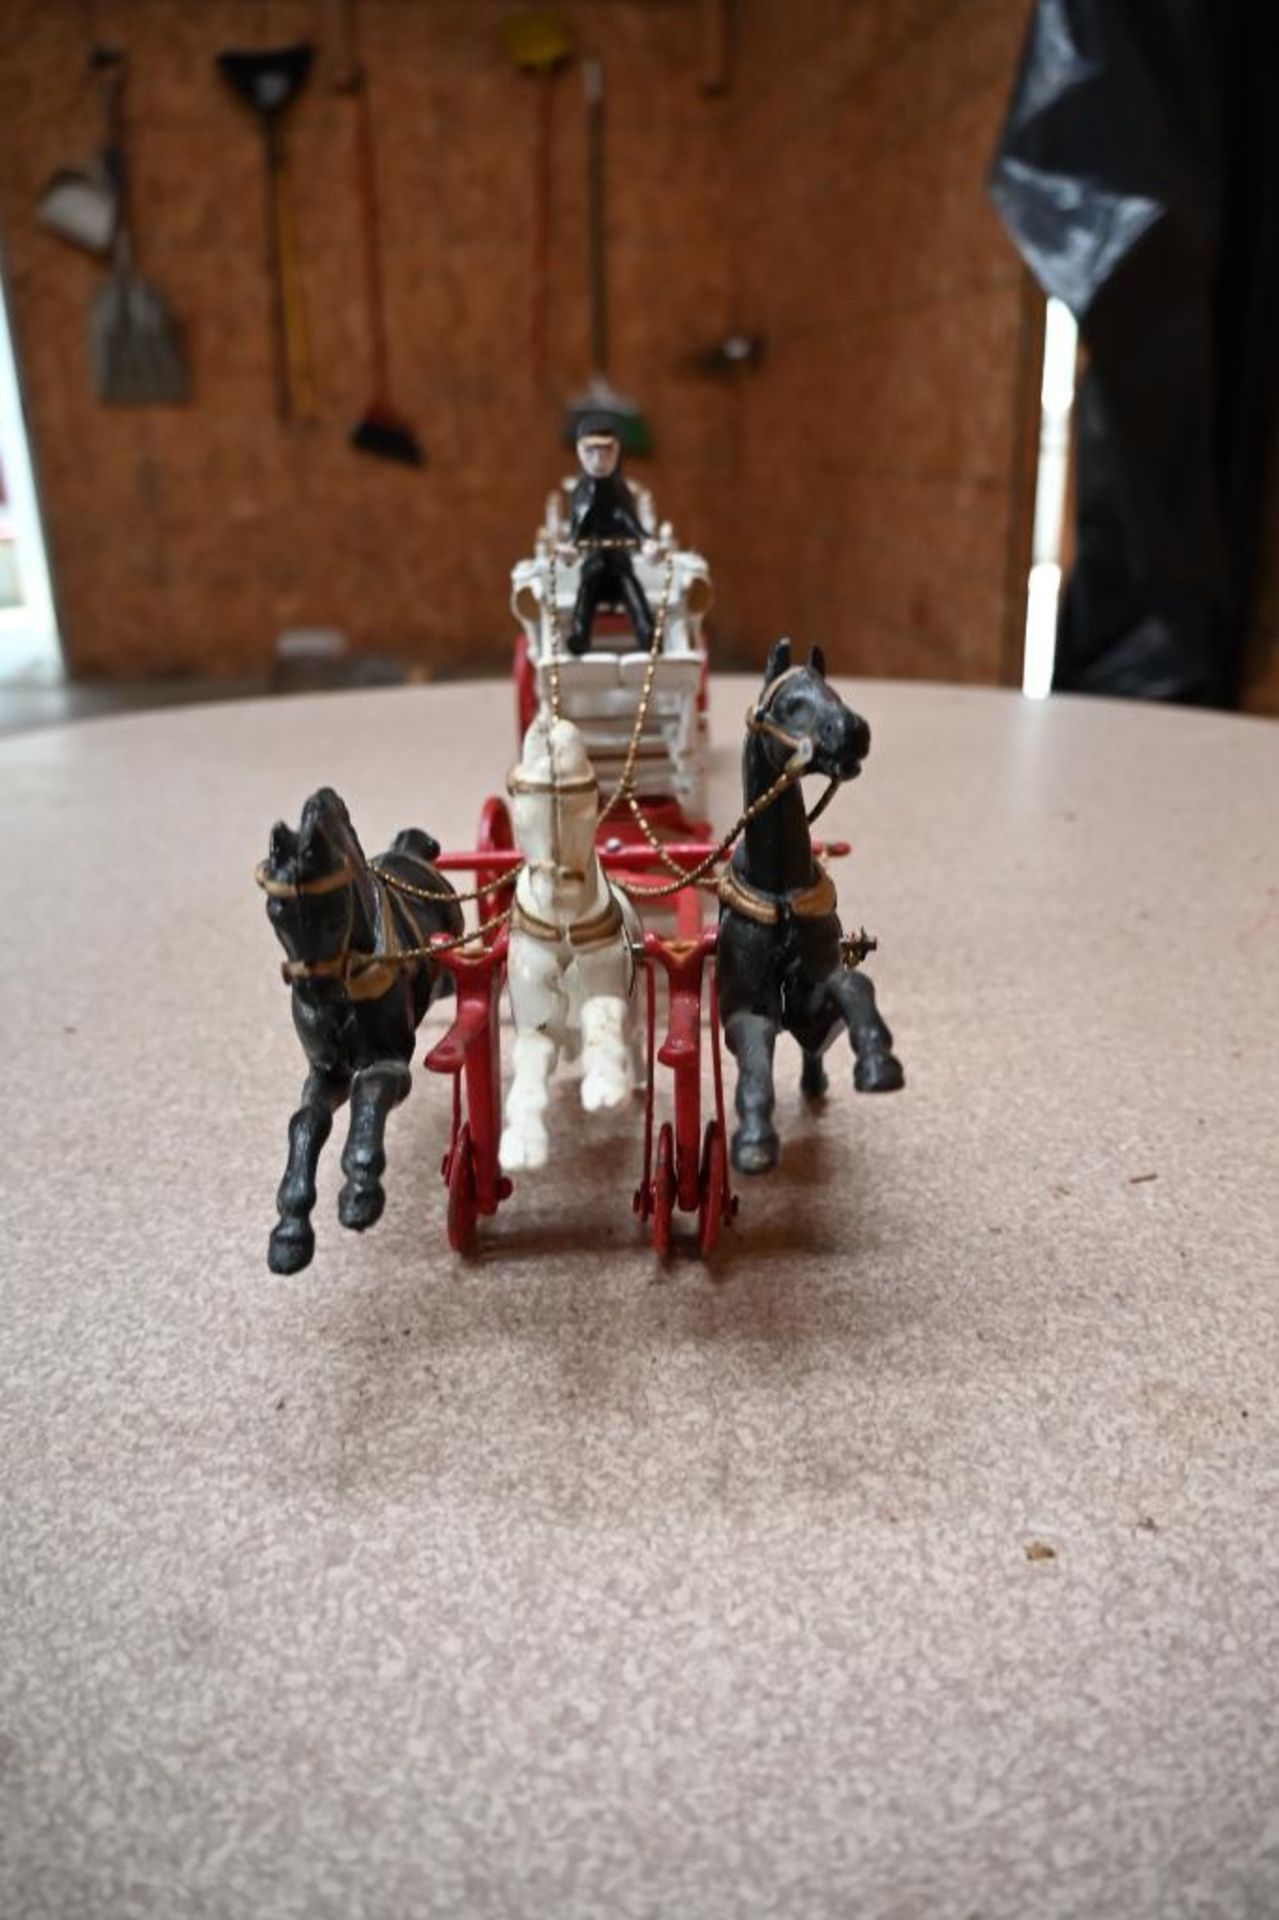 Steel Toy Ladder Carriage - Image 3 of 10